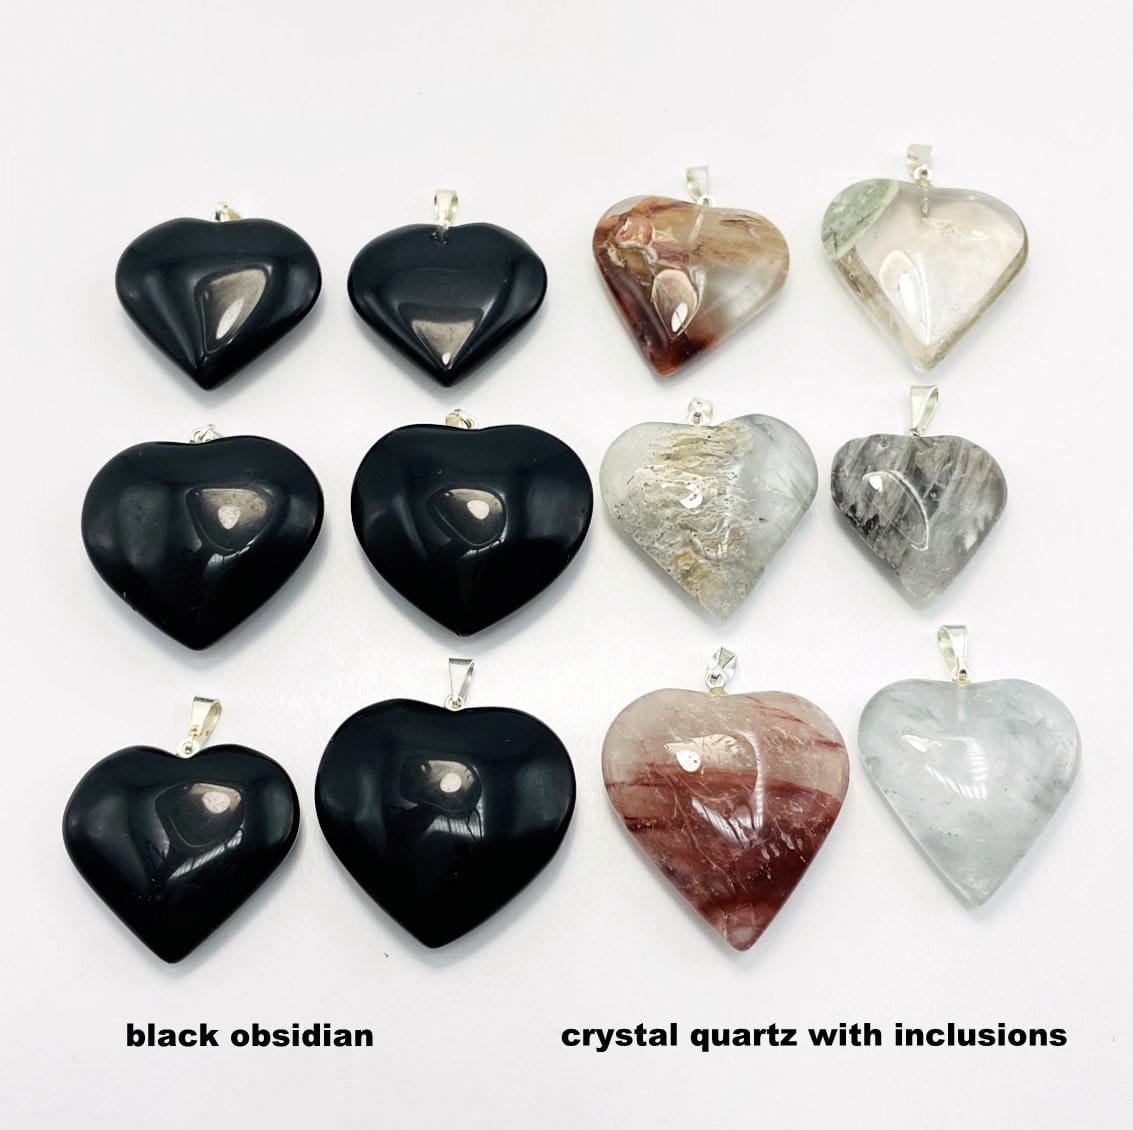 Gemstone Heart Pendants with Silver Toned Bail come in black obsidian and crystal quartz with inclusions